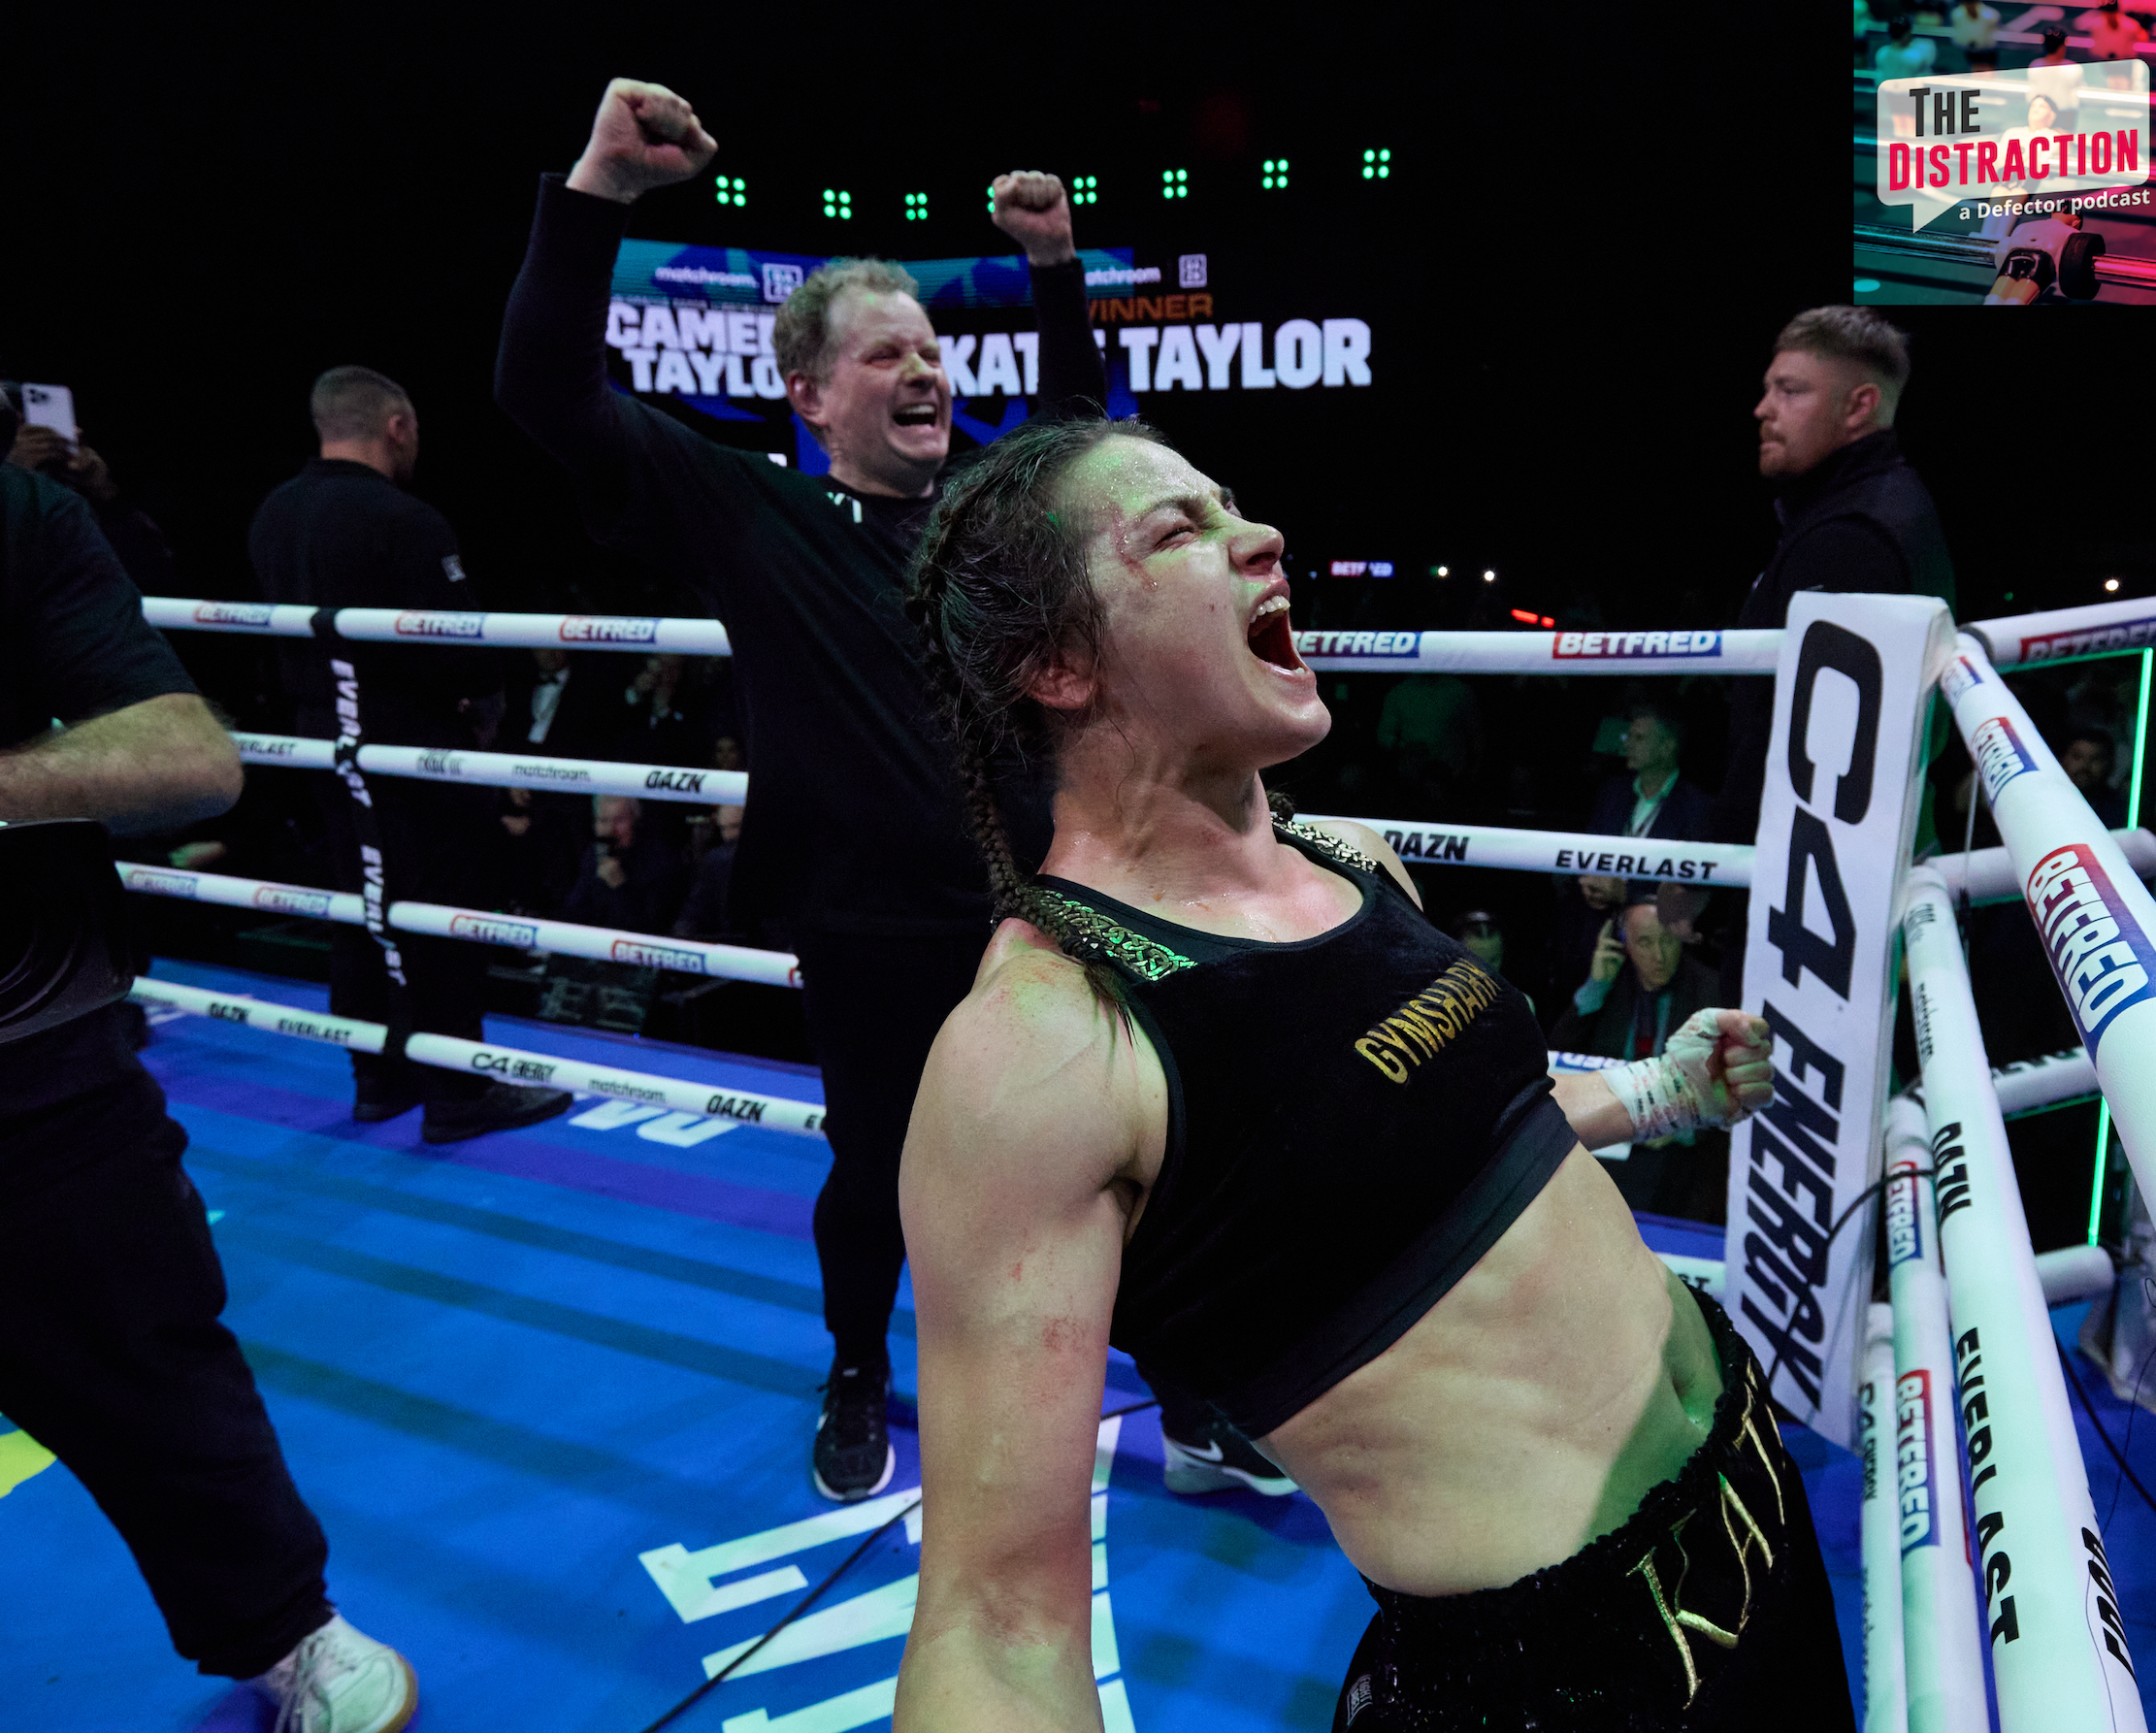 Irish boxer Katie Taylor exulting after defeating Chantelle Cameron in a title bout in Dublin on November 25, 2023.